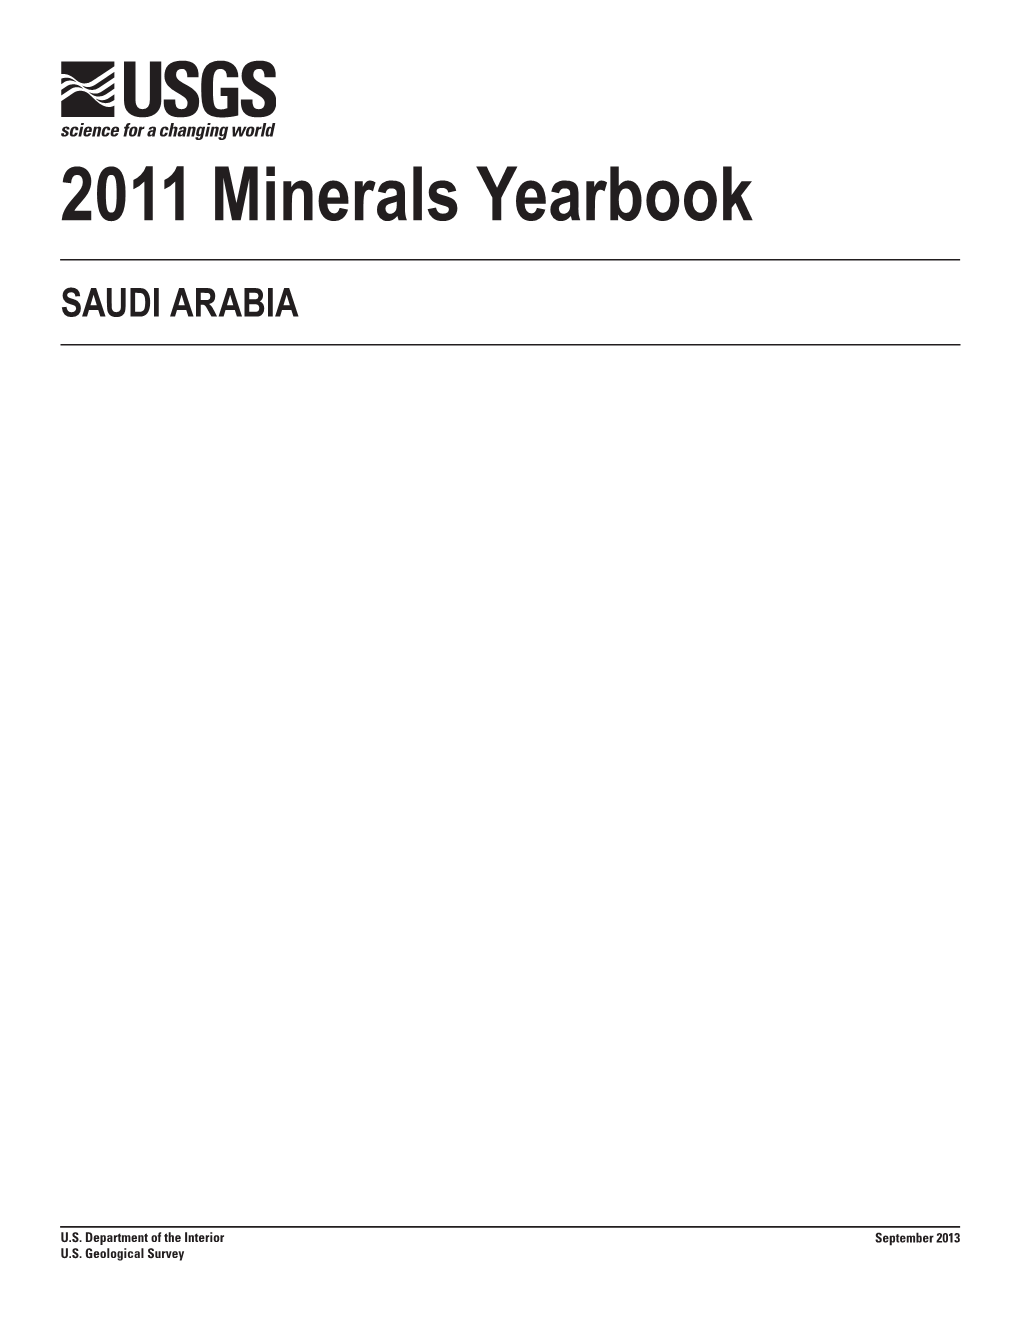 The Mineral Industry of Saudi Arabia in 2011